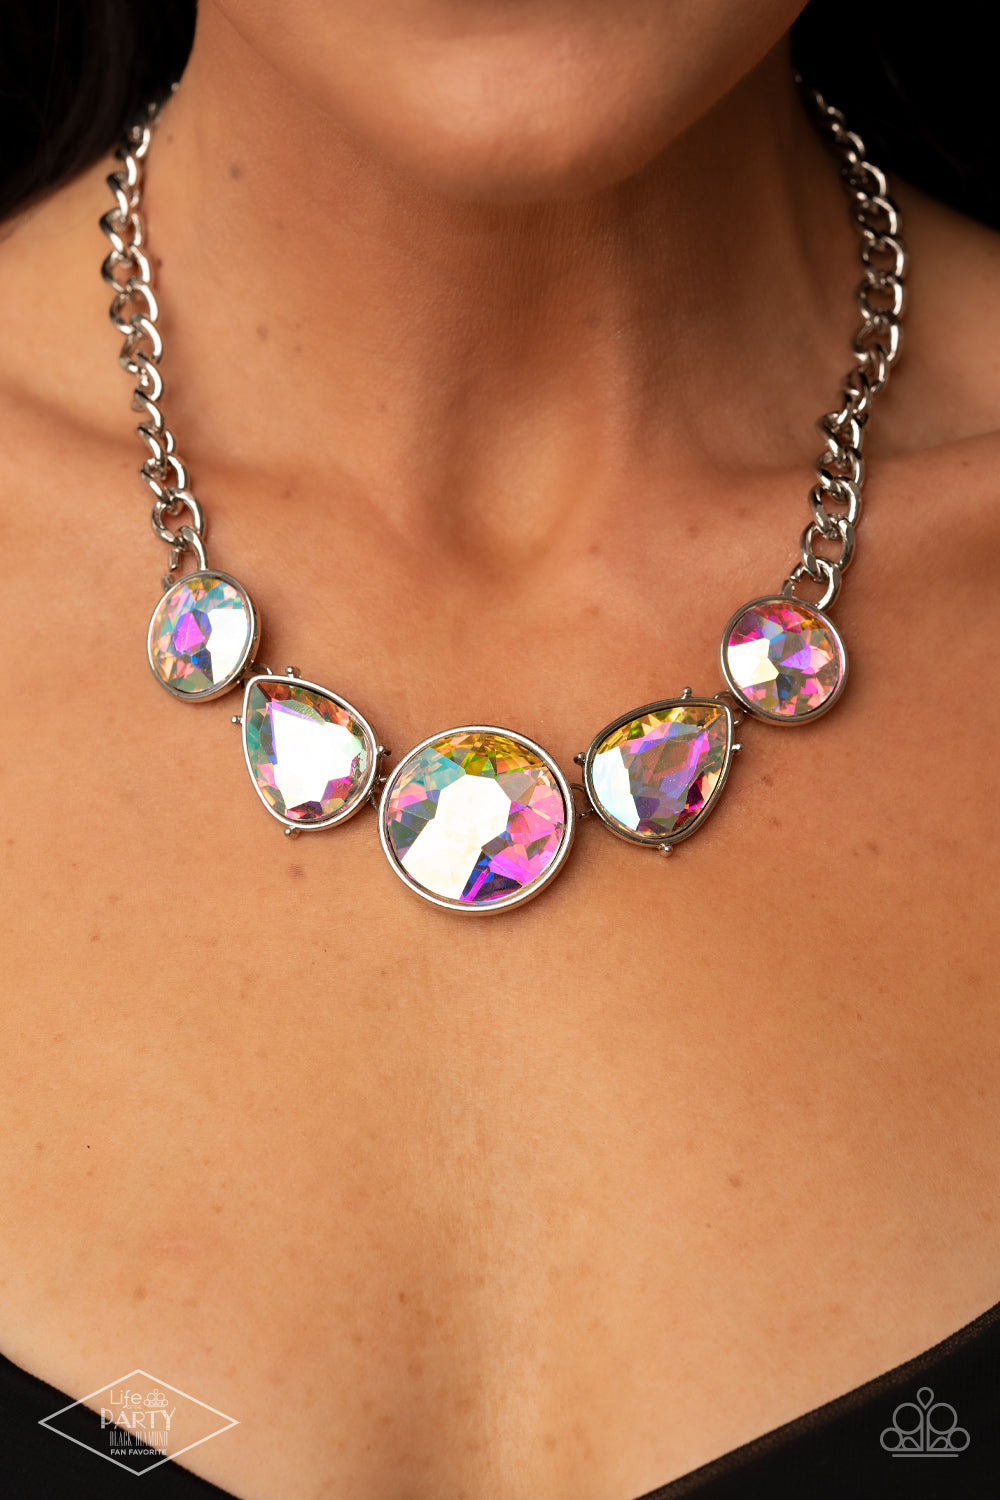 All The Worlds My Stage - Multi Color Iridescent - Silver Teardrop Necklace - Paparazzi Accessories - Infused with heavy silver chain, an exaggerated display of round and teardrop shaped iridescent rhinestones connects below the collar for a blinding look. Features an adjustable clasp closure.